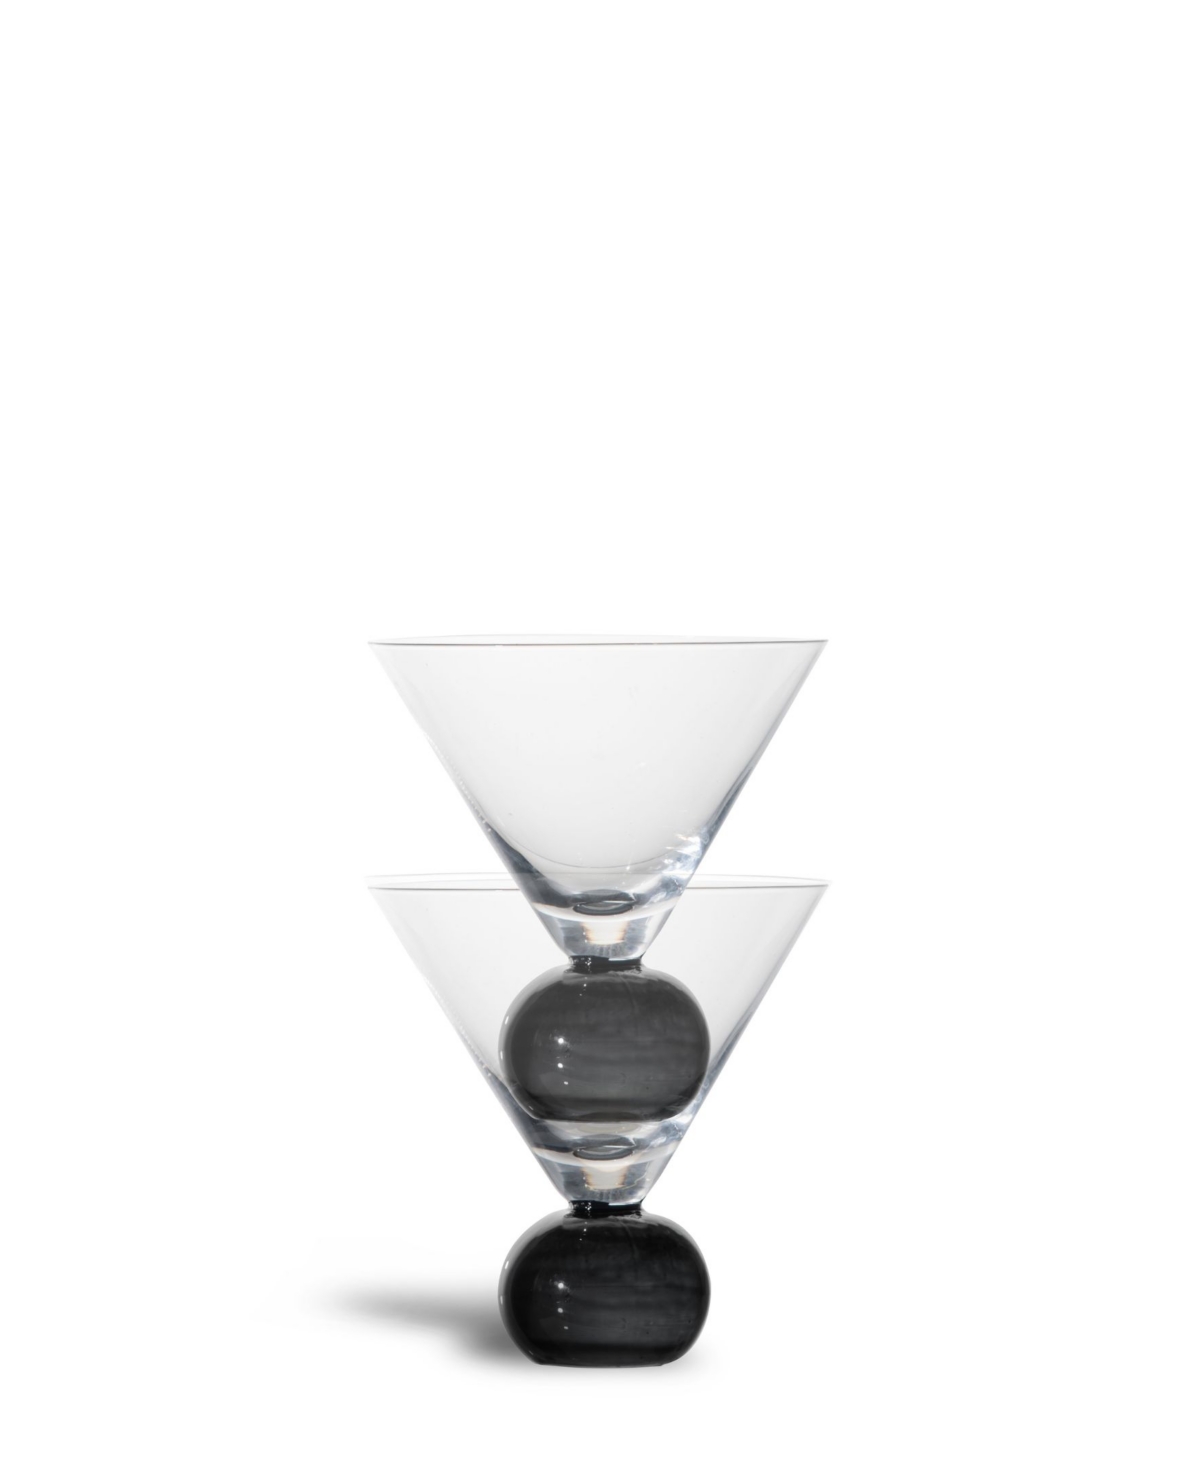 Byon By Widgeteer Spice Martini Glasses, Set Of 2 In Black